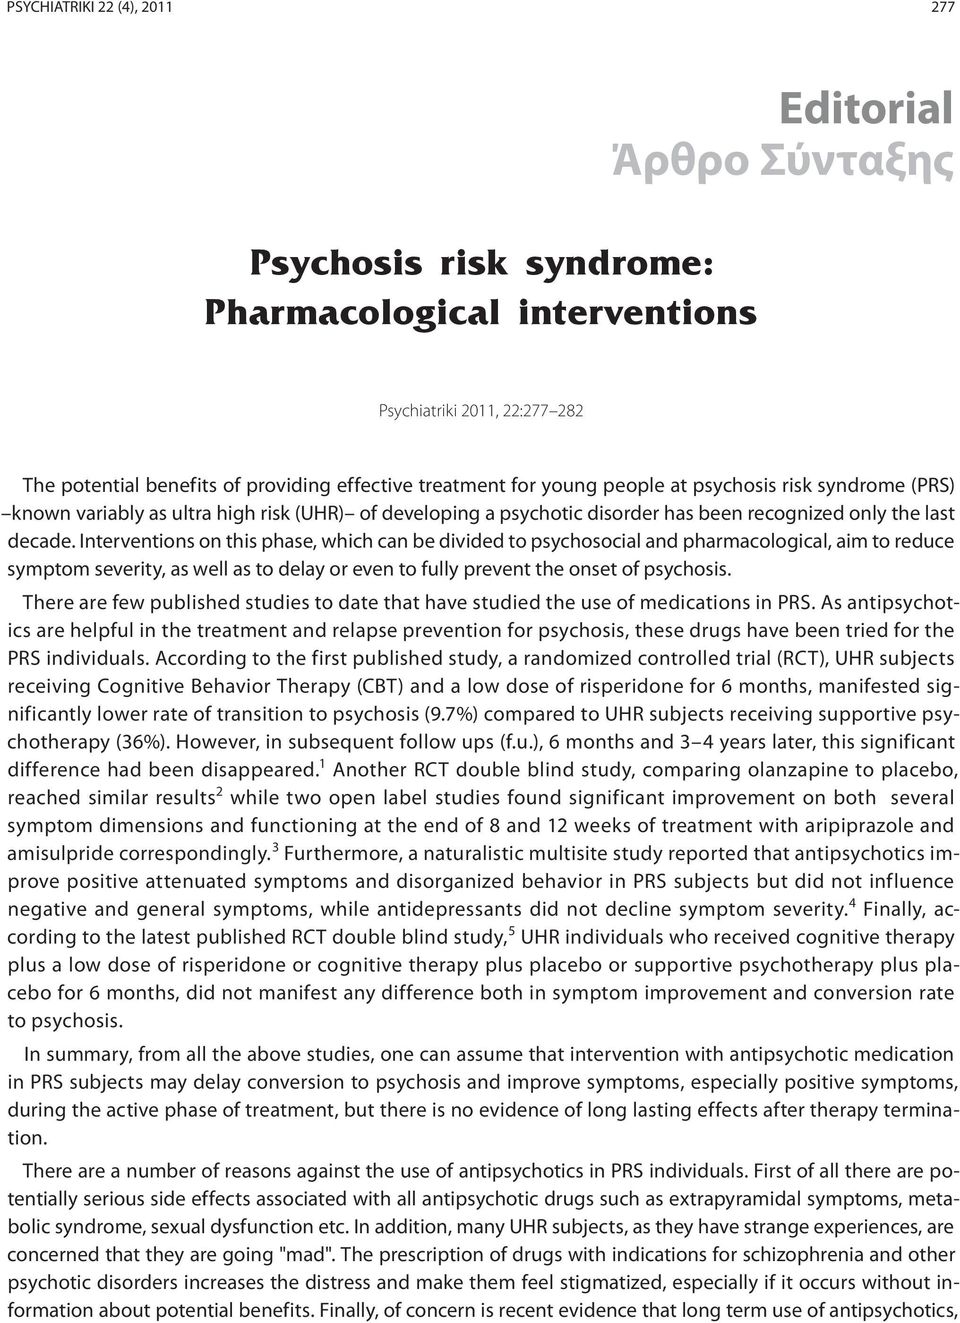 Interventions on this phase, which can be divided to psychosocial and pharmacological, aim to reduce symptom severity, as well as to delay or even to fully prevent the onset of psychosis.